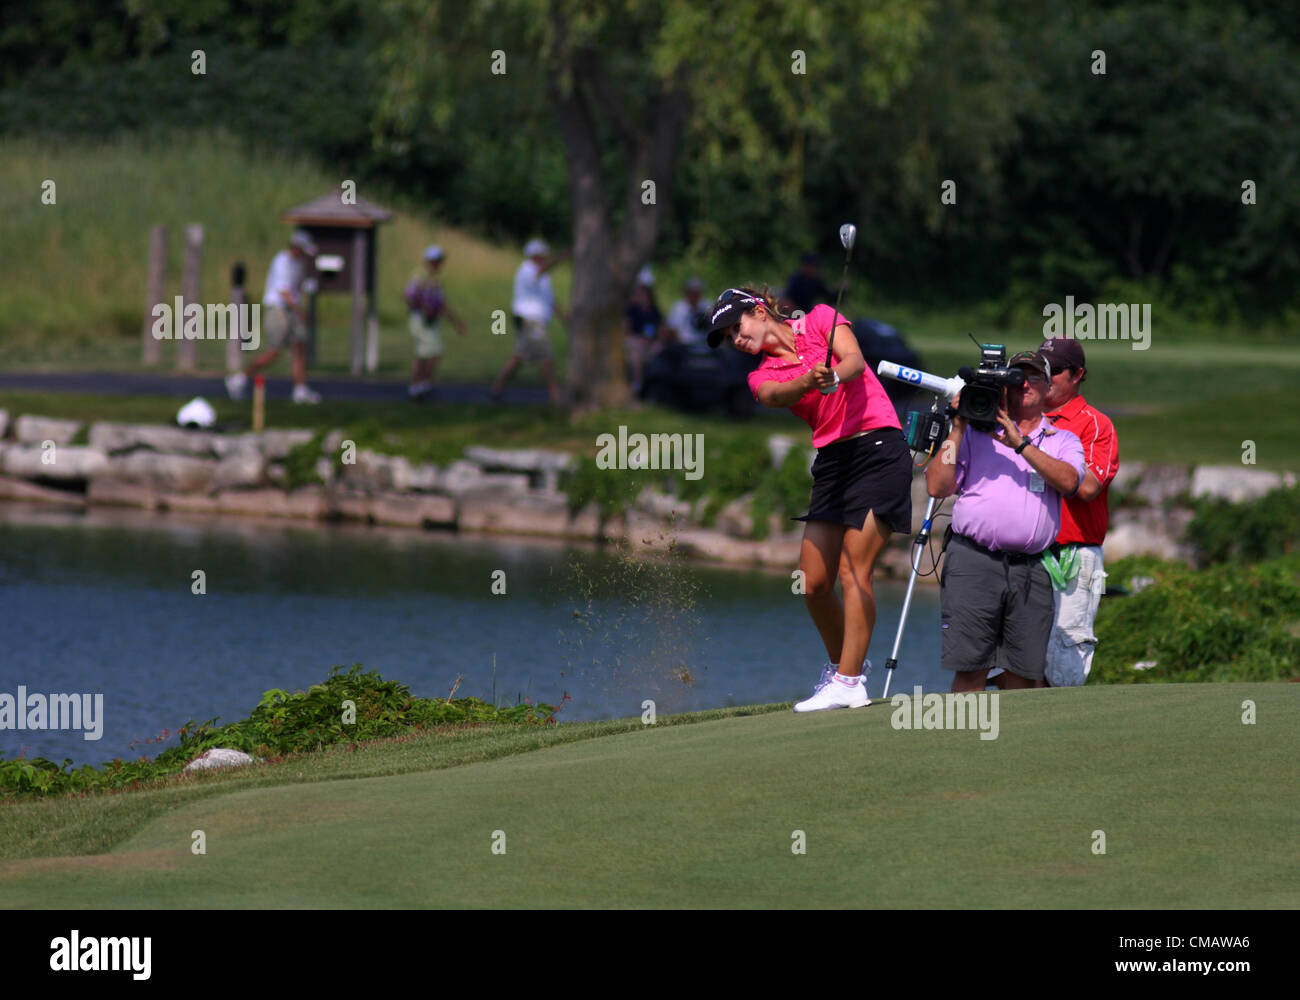 06 JULY 2012: Beatriz Recari on the fourteenth fairway during the second round of the US Open at Blackwolf Run in Kohler, WI. Stock Photo